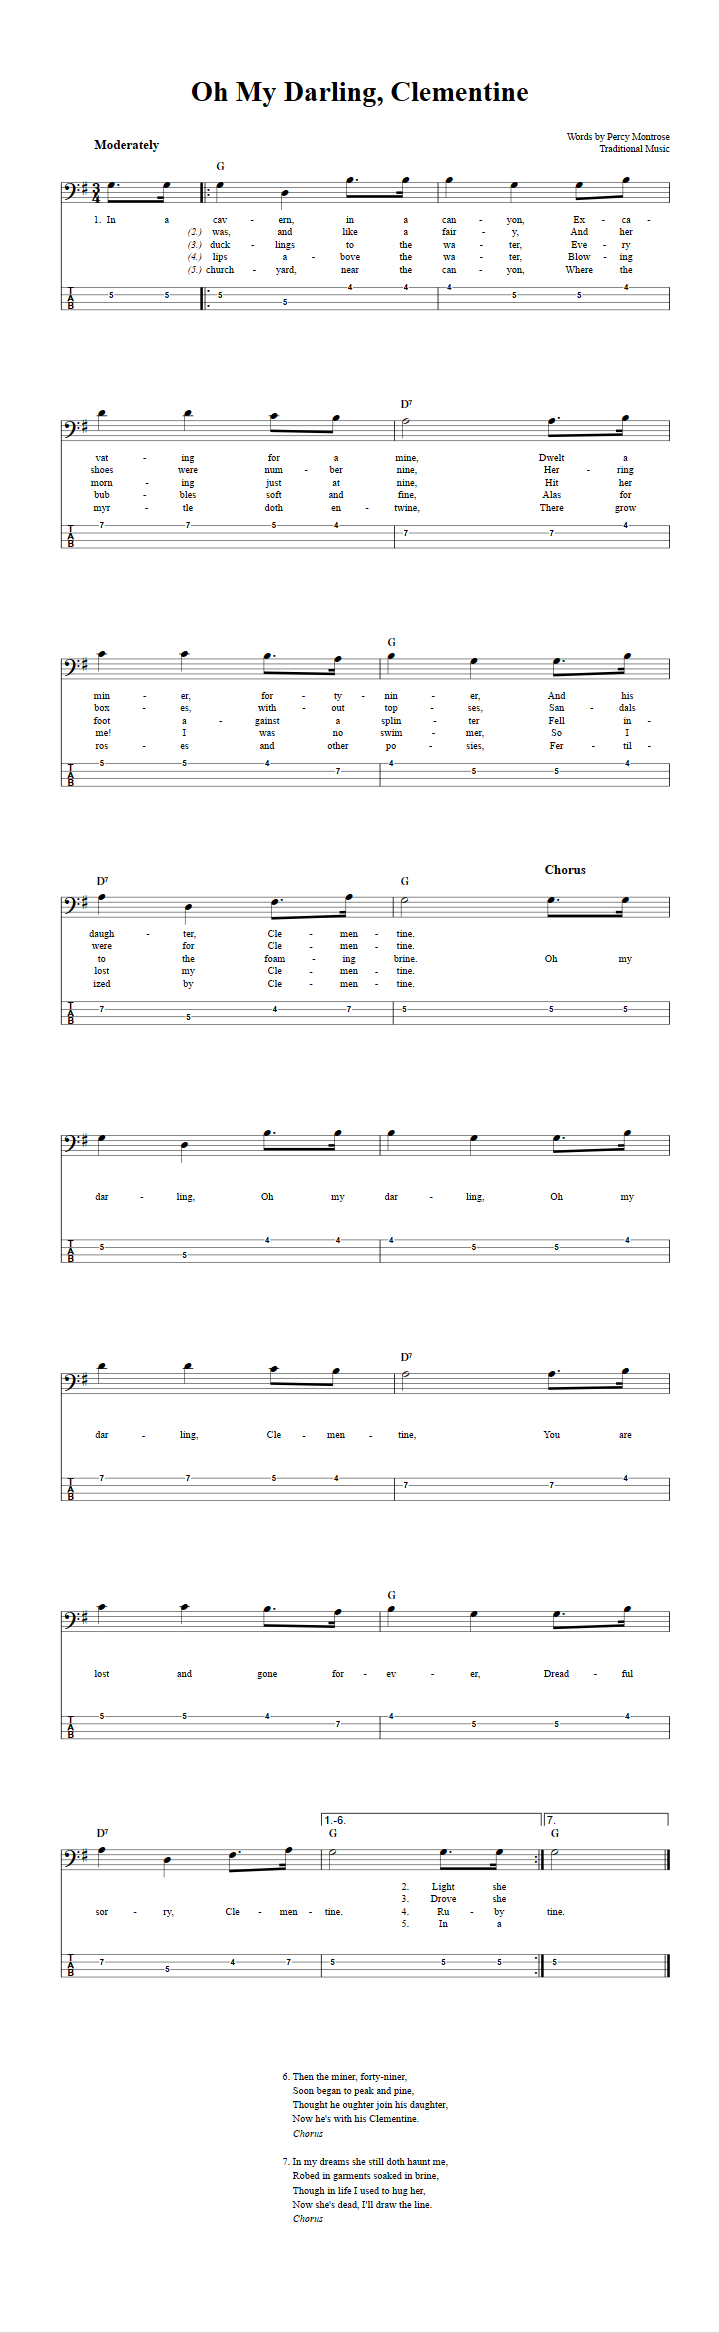 Oh My Darling Clementine Chords Sheet Music And Tab For Bass Guitar With Lyrics